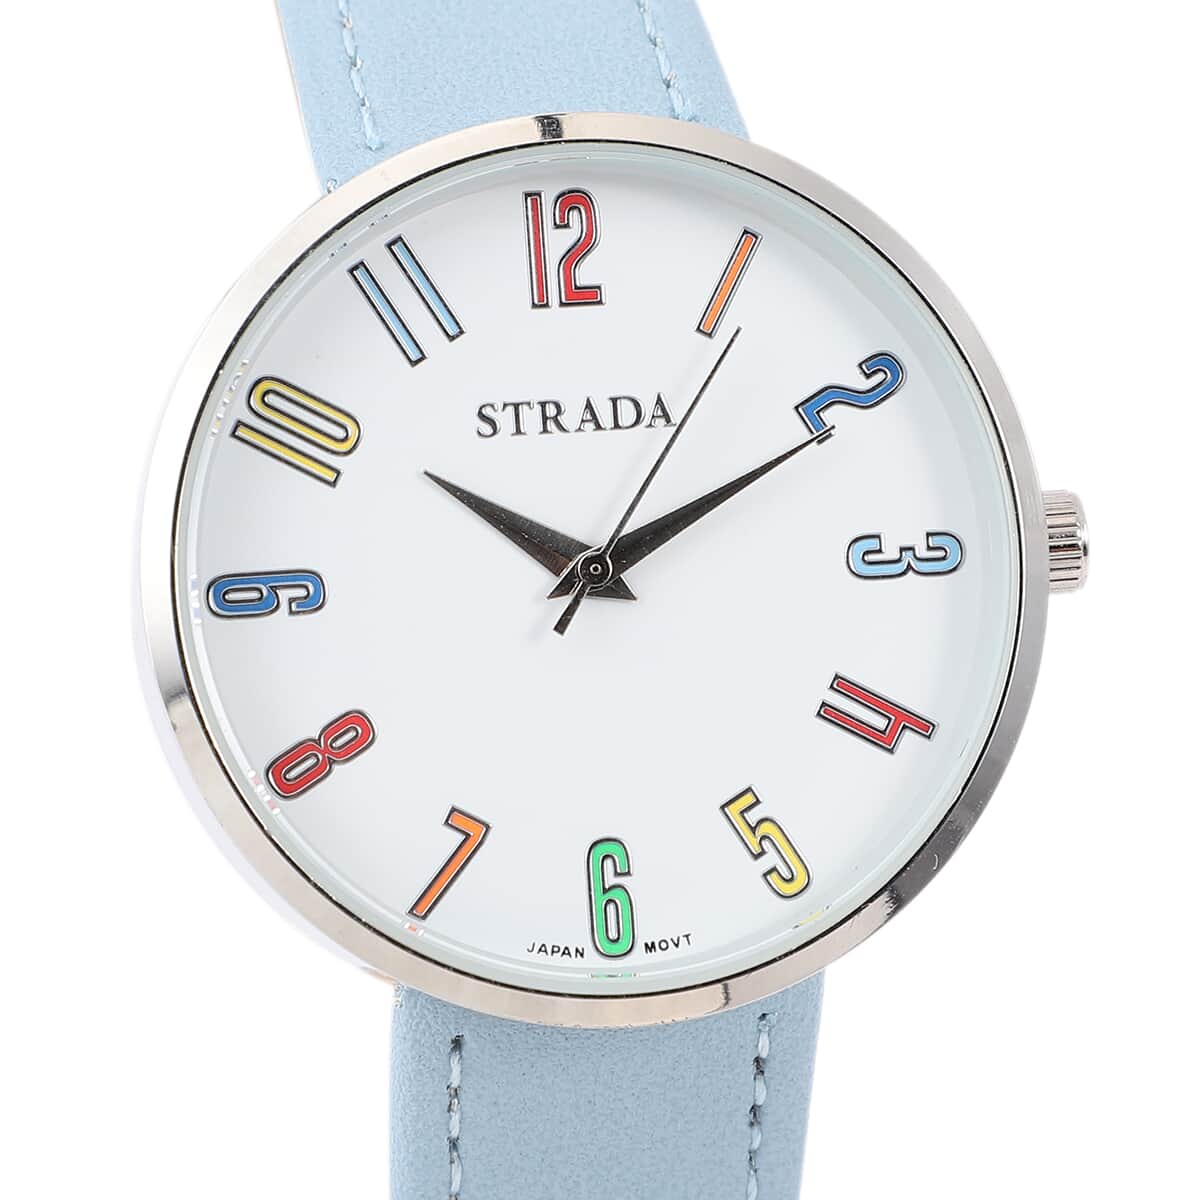 STRADA Japanese Movement Water Resistant Watch with Black Faux Leather Band image number 2